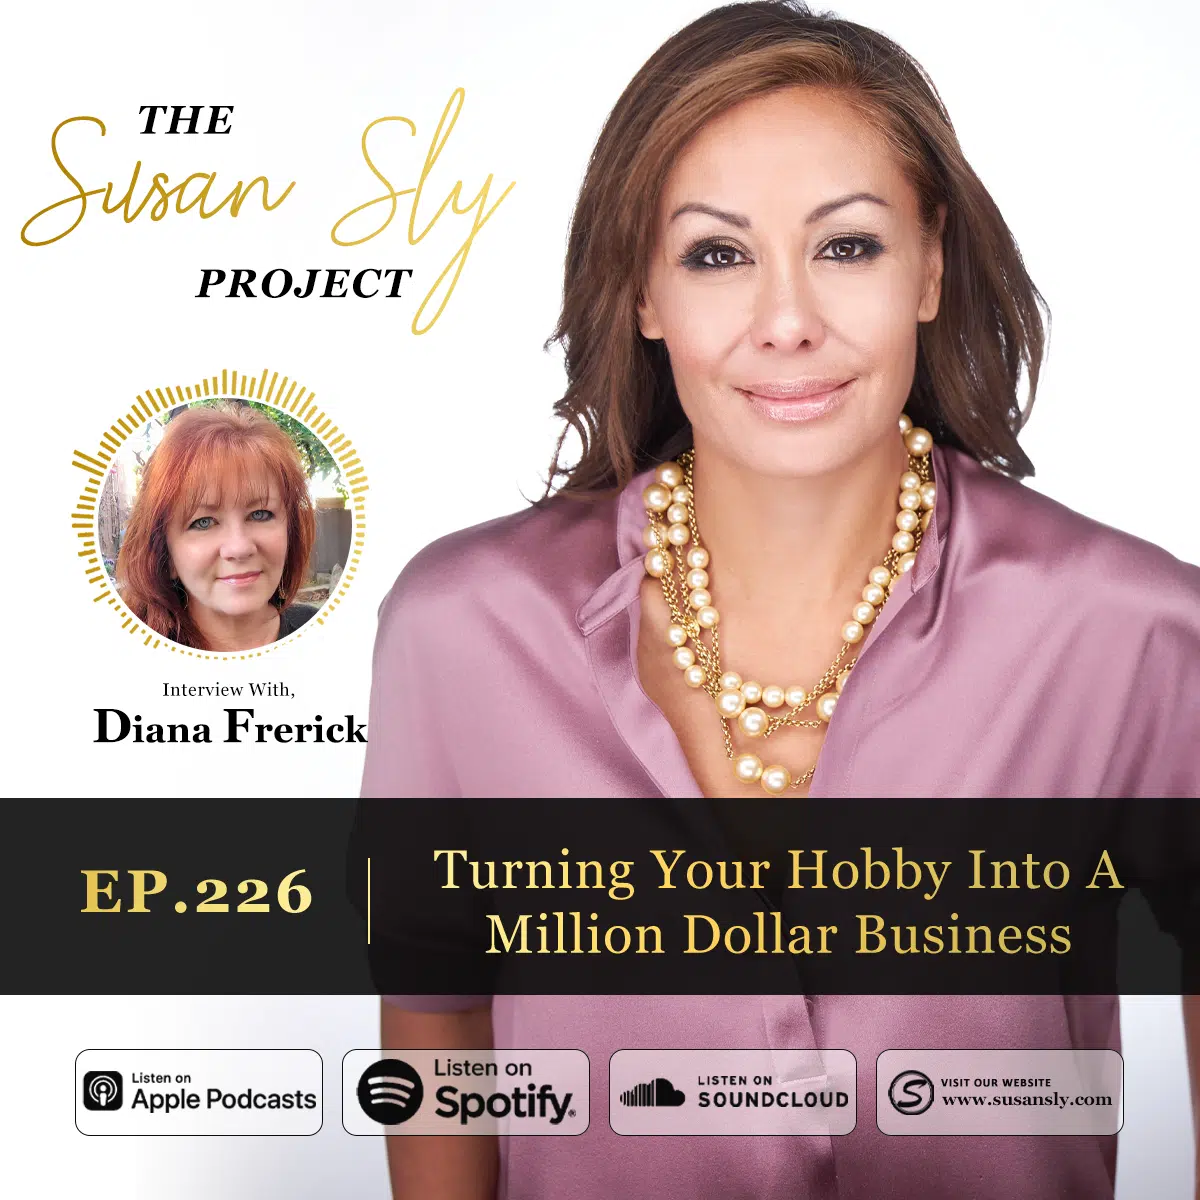 Susan Sly interview with Diana Frerick